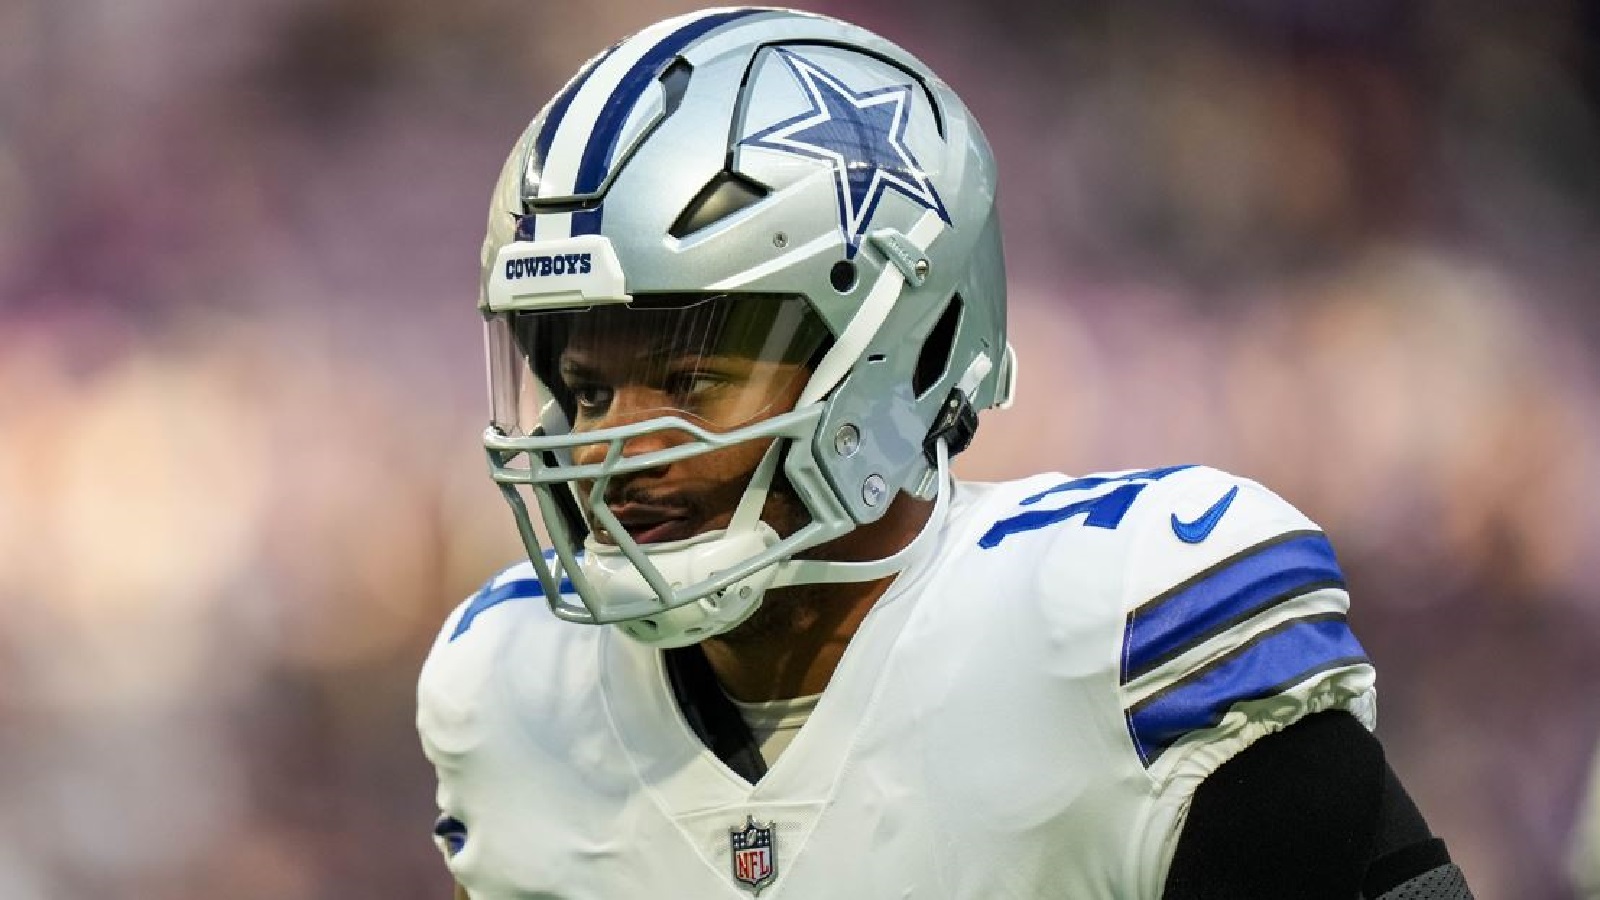 Agent 0 coming soon!': Cowboys' Micah Parsons tweets desire to